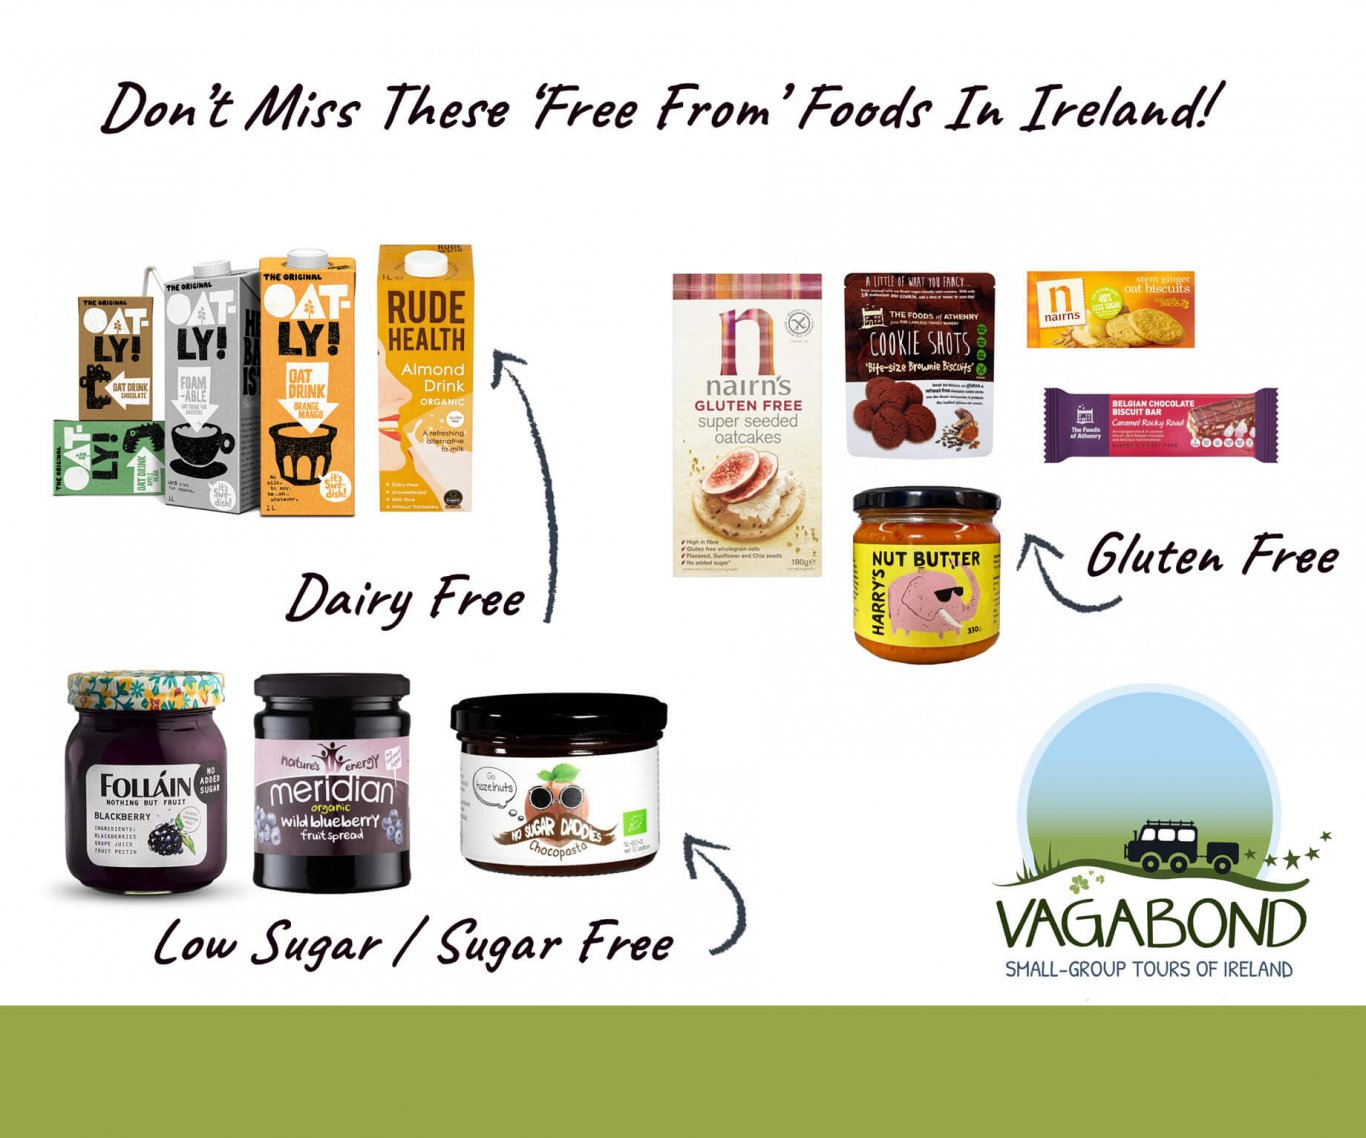 Foods for people with special dietary requirements to try while travelling in Ireland